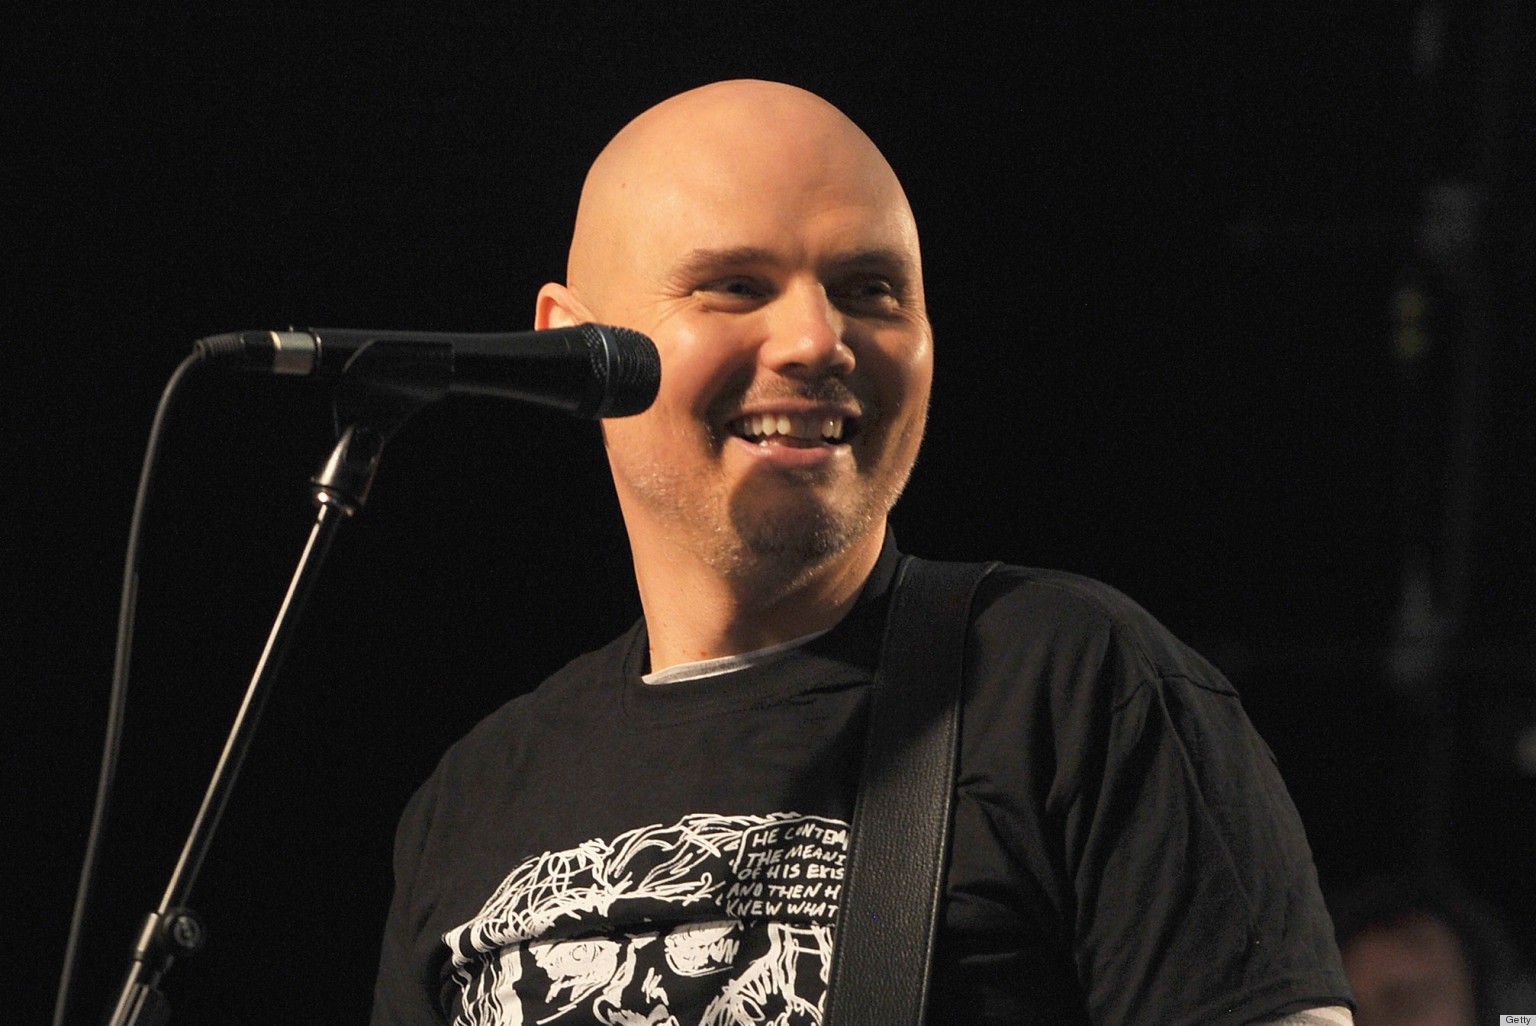 The Smashing Pumpkins Perform At The iHeartRadio Theater Presented By P.C. Richard & Son On June 19, 2012